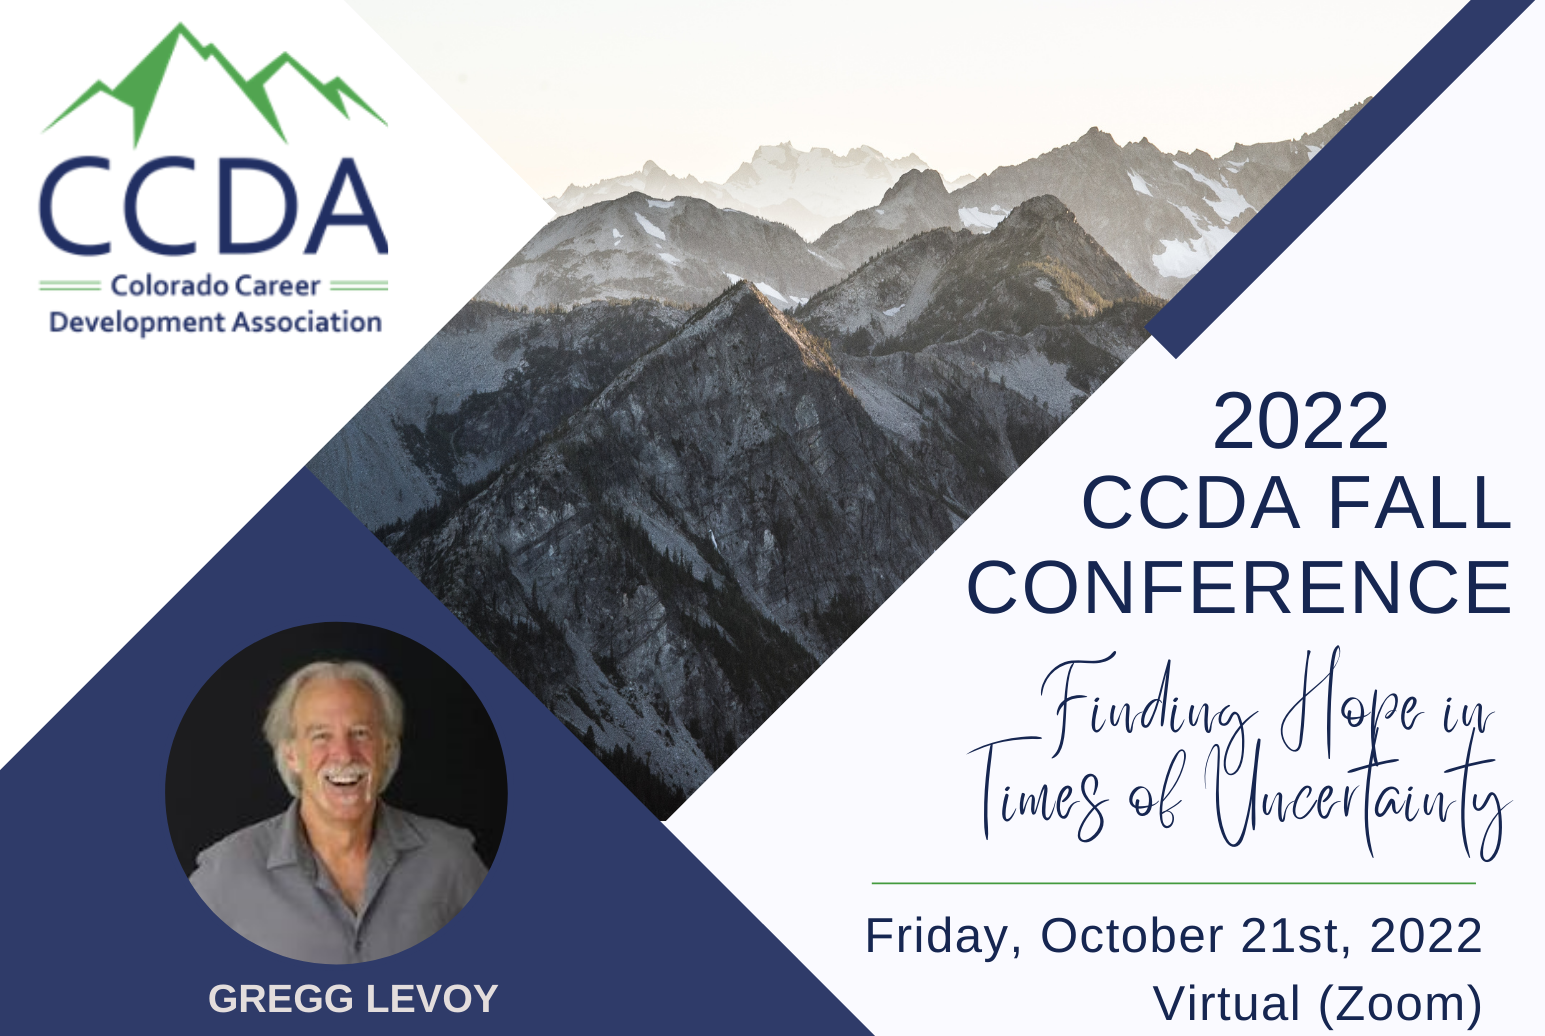 Invitation to CCDA's Fall 2022 Conference featuring Gregg Levoy. Gregg is pictured and a stock photo of snowy mountains is in the background.